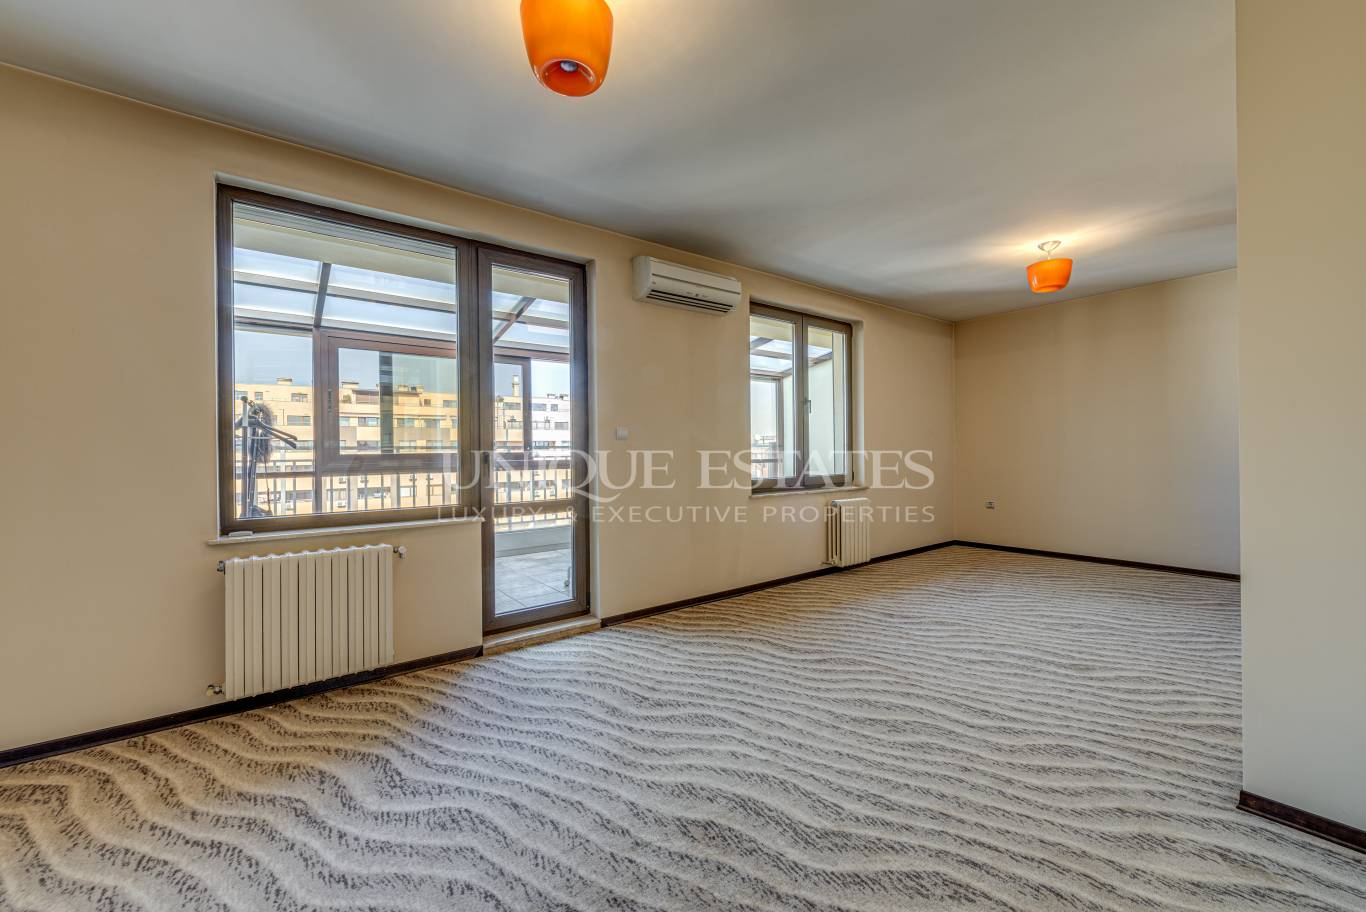 Apartment for sale in Sofia, Borovo with listing ID: K16114 - image 7